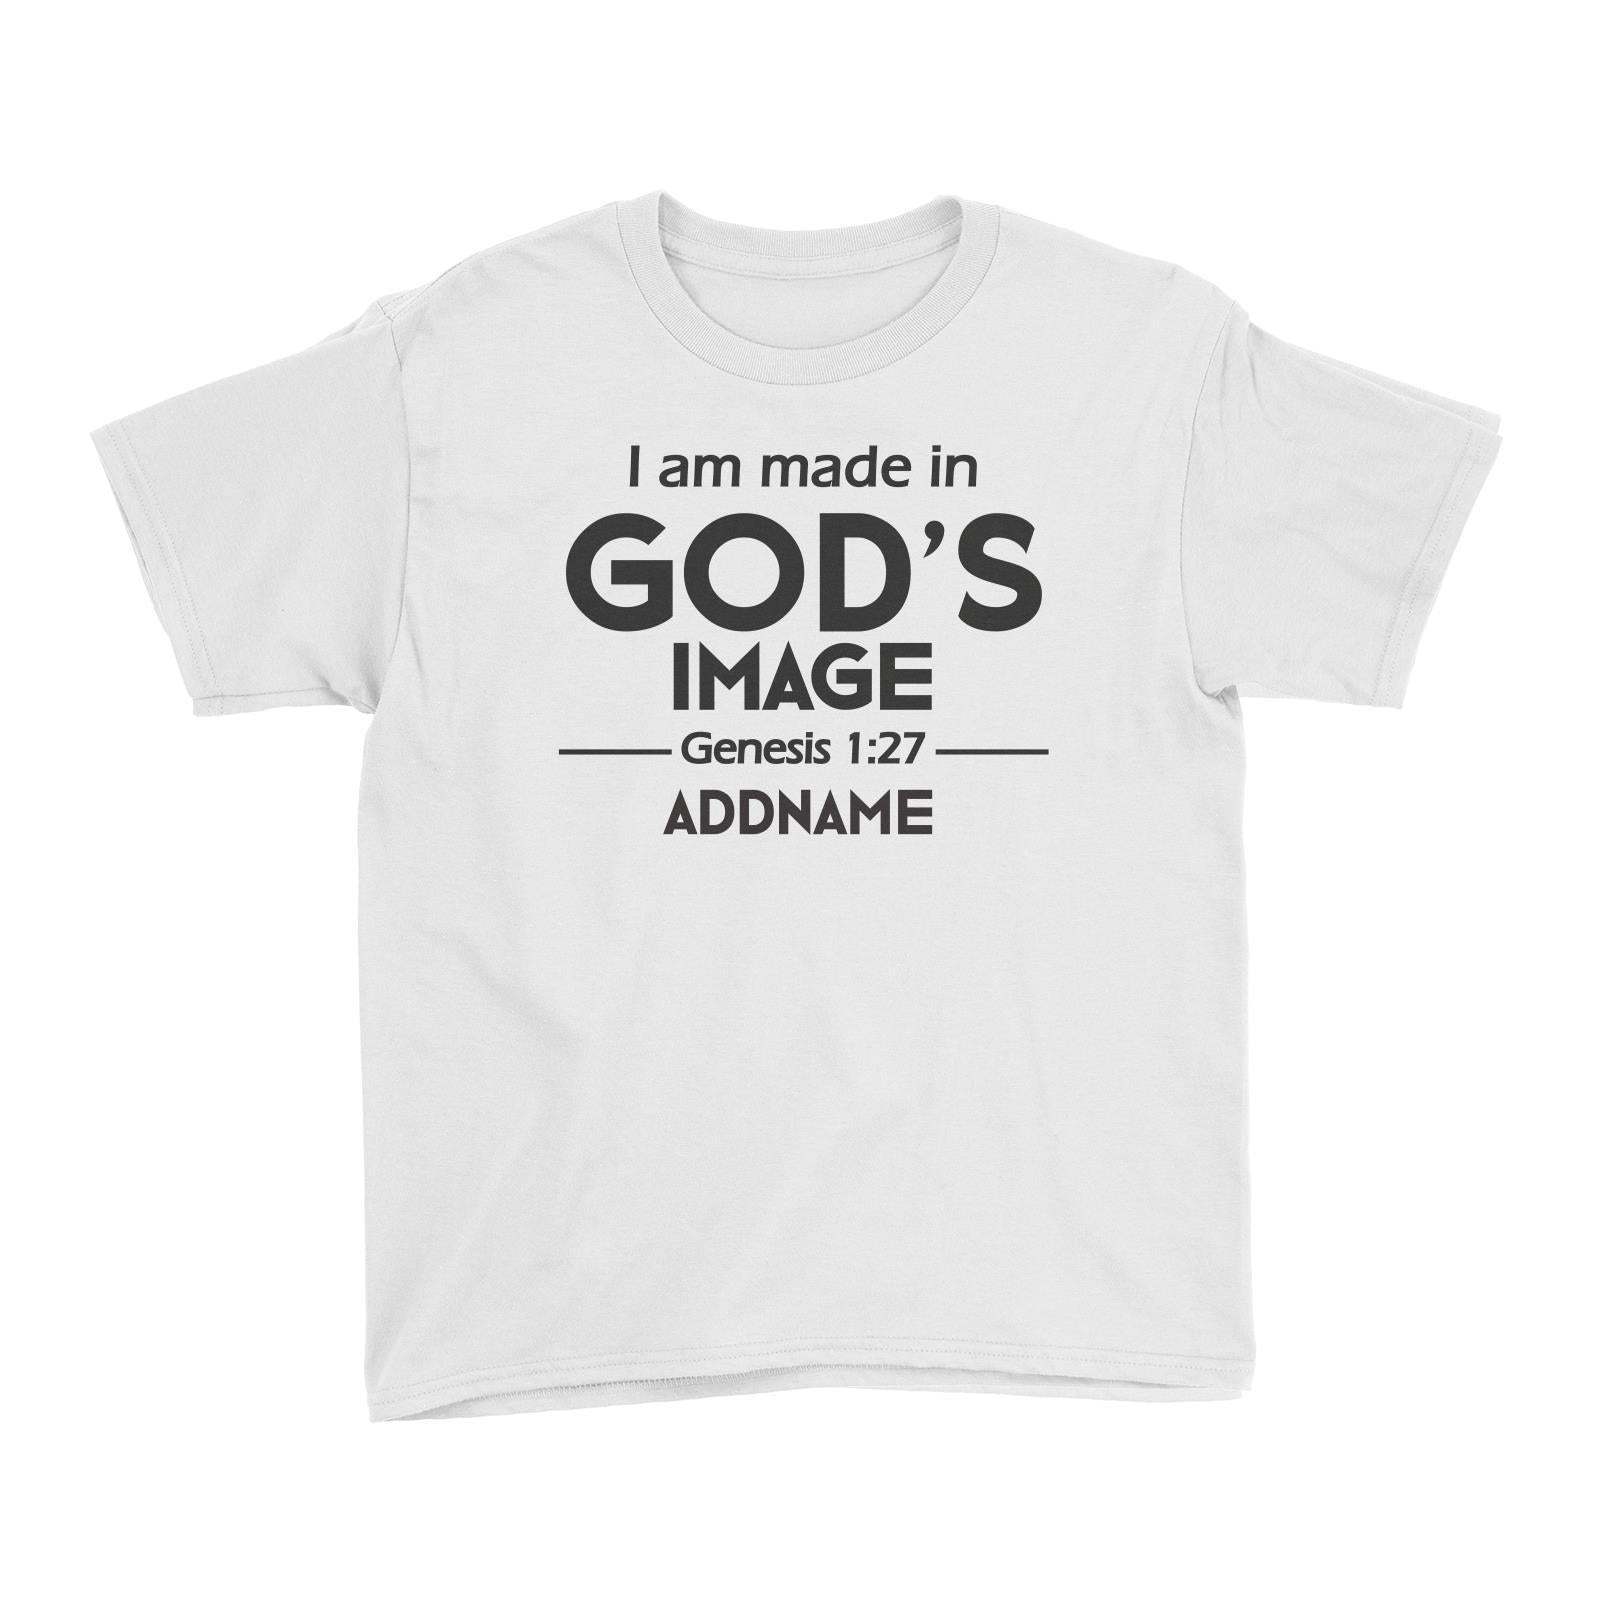 Christian Baby I Am Made in God's Image Genesis 1.27 Addname Kid's T-Shirt